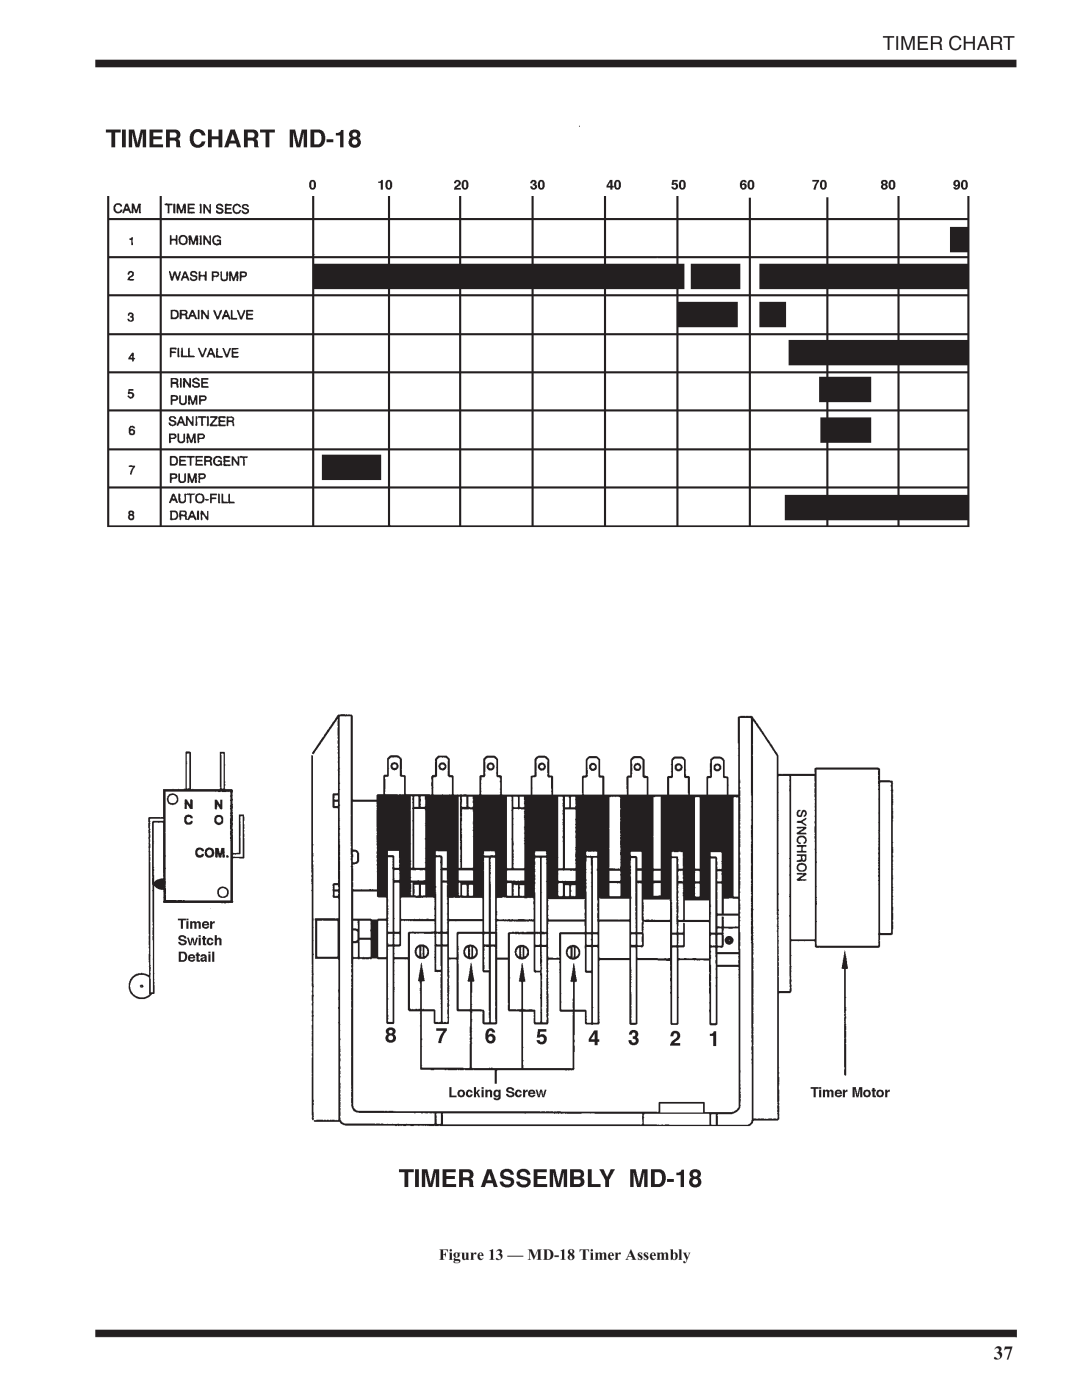 Moyer Diebel MD18-2, MD18-1 technical manual Timer Chart, MD-18 Timer Assembly 